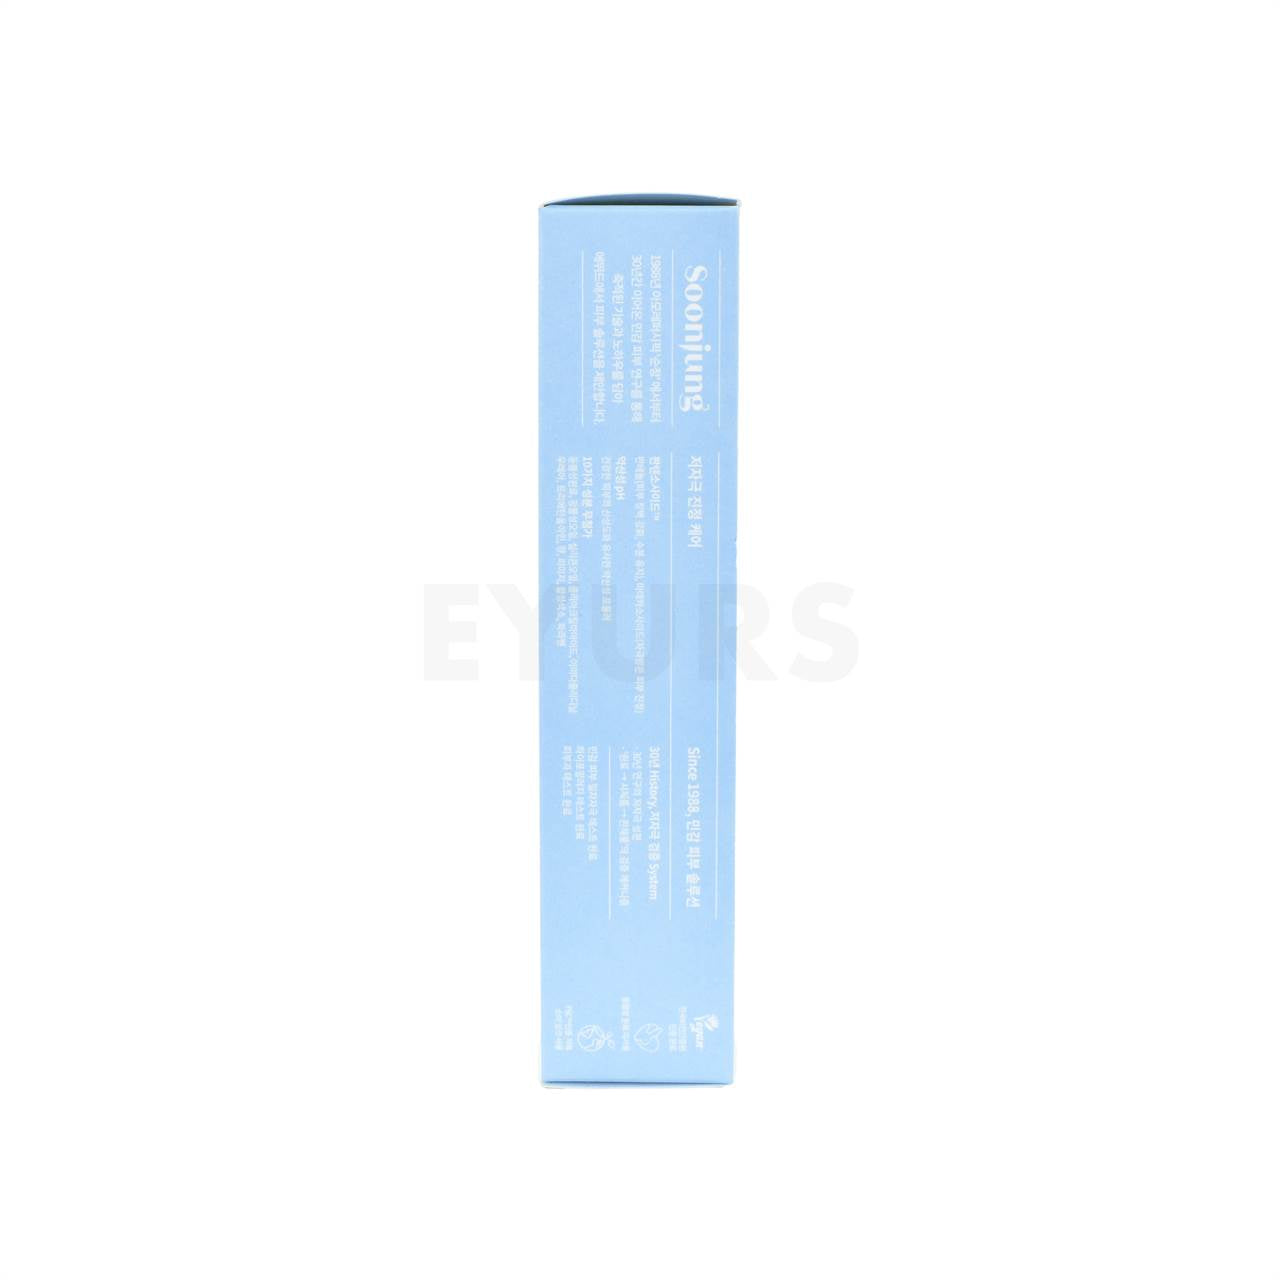 etude soon jung 2x barrier intensive cream right side packaging